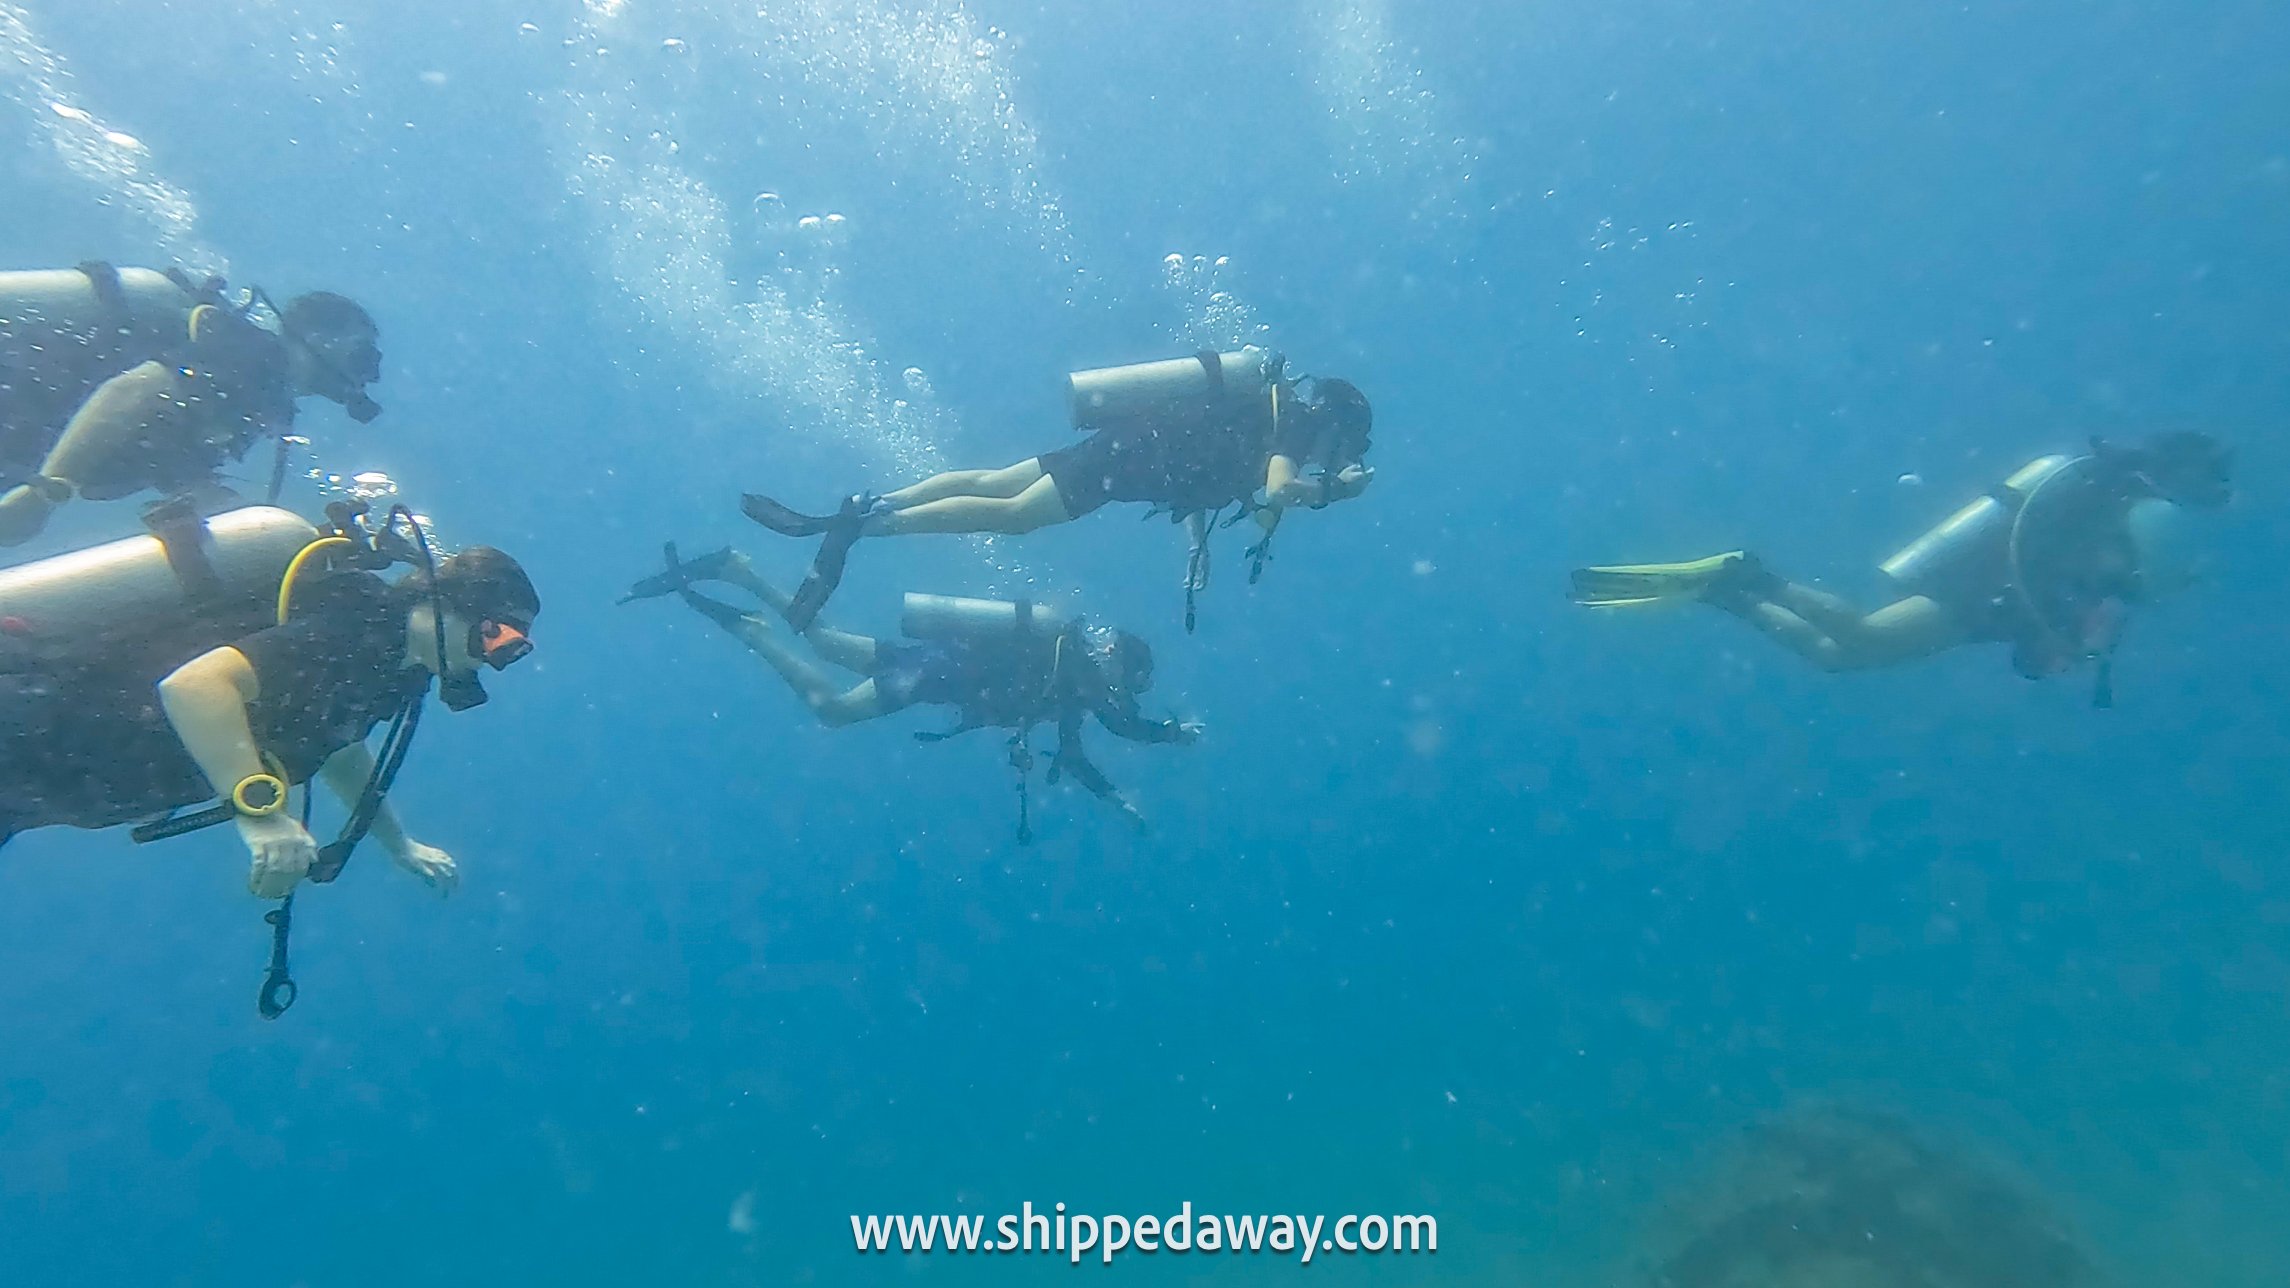 Group of divers underwater while Scuba Diving in Koh Tao, Thailand